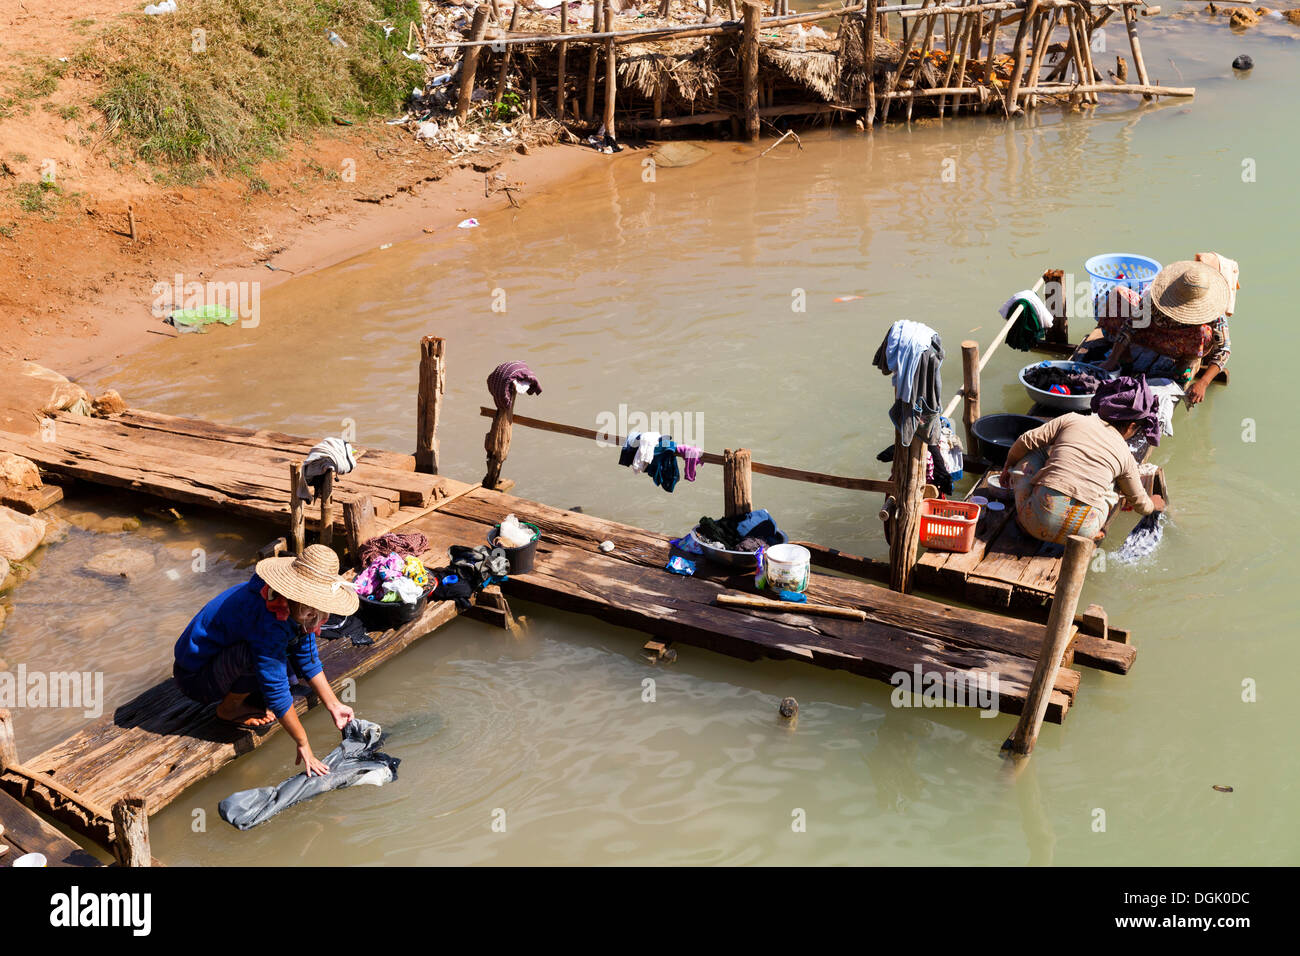 Washday by the river at Inn Thein Village in Myanmar. Stock Photo